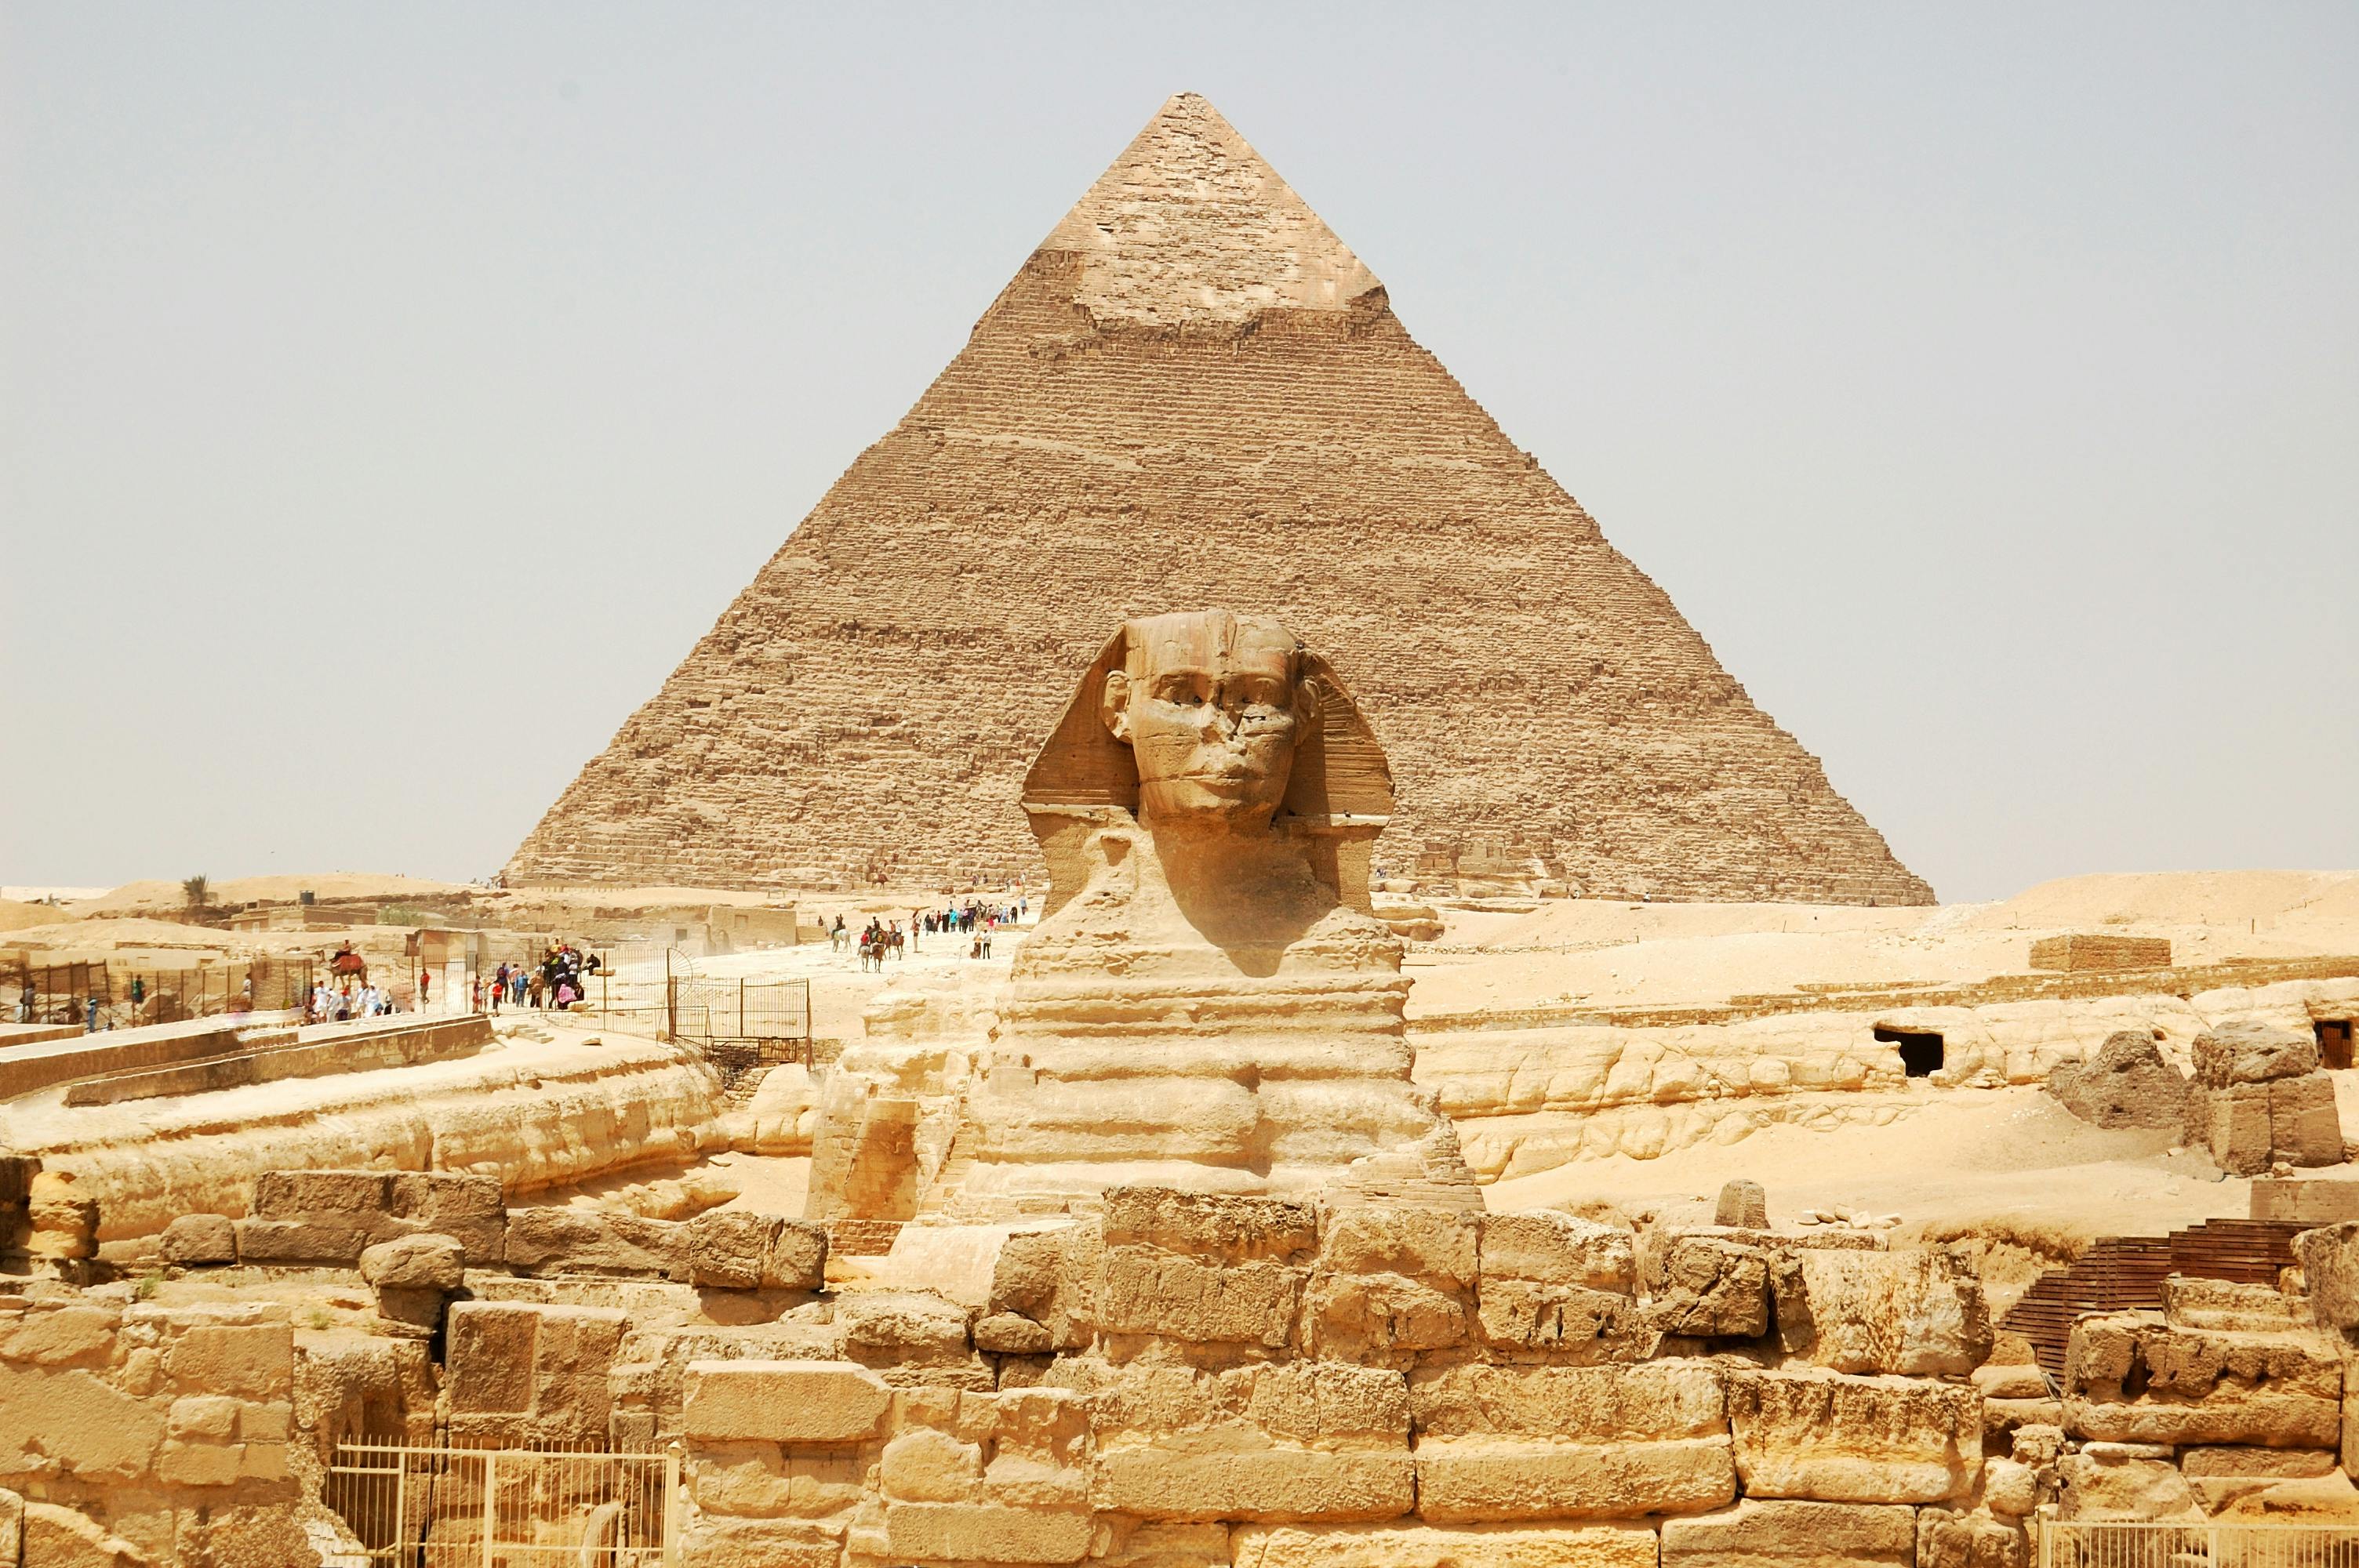 Pyramids of Giza & the Great Sphinx